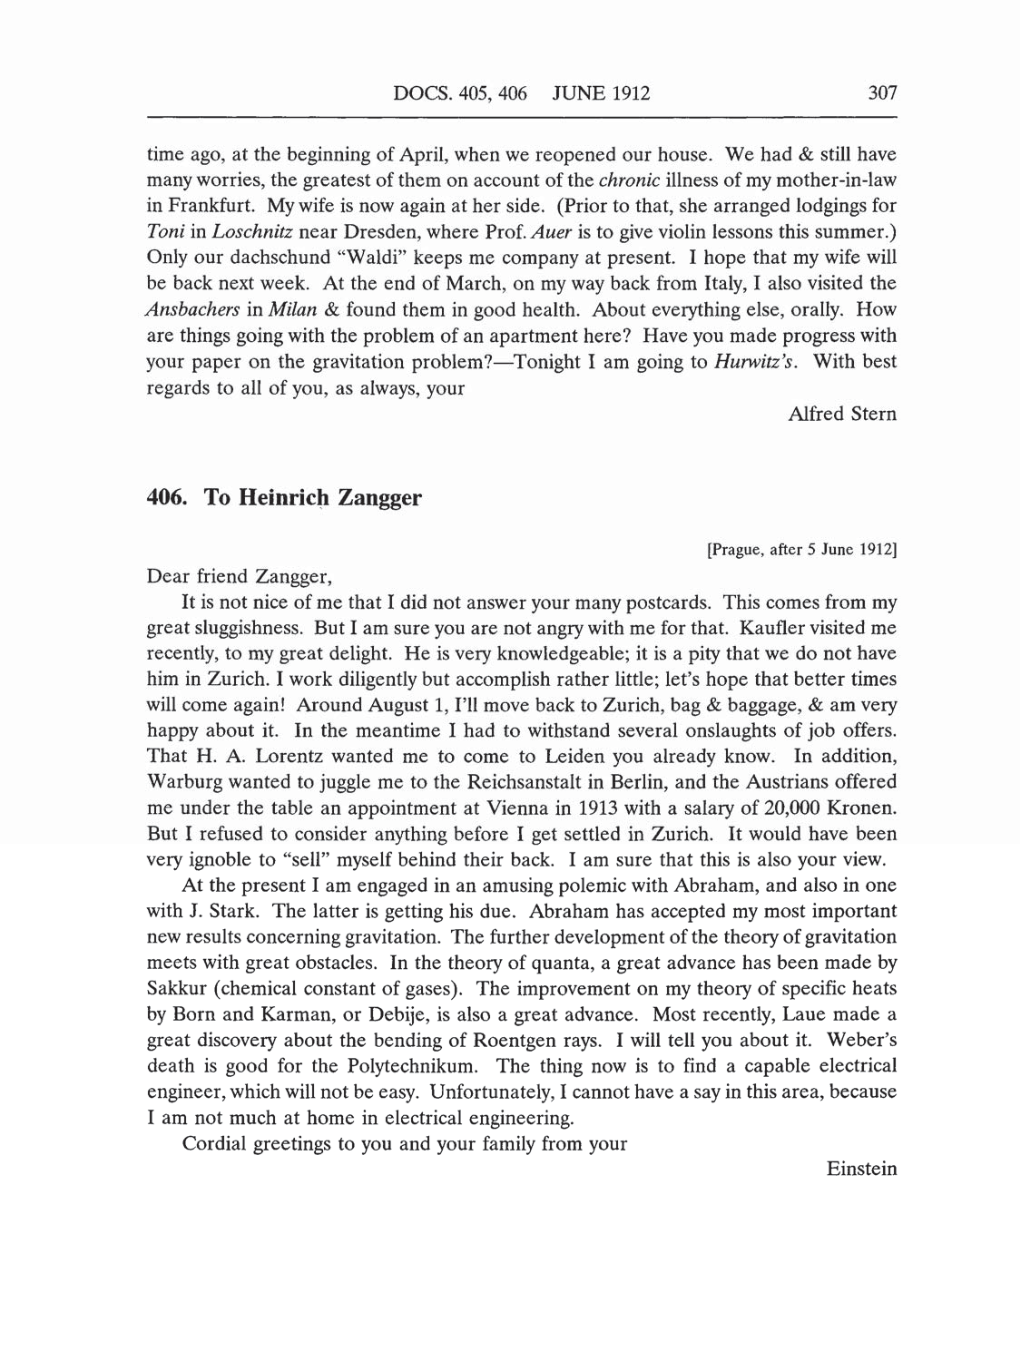 Volume 5: The Swiss Years: Correspondence, 1902-1914 (English translation supplement) page 307